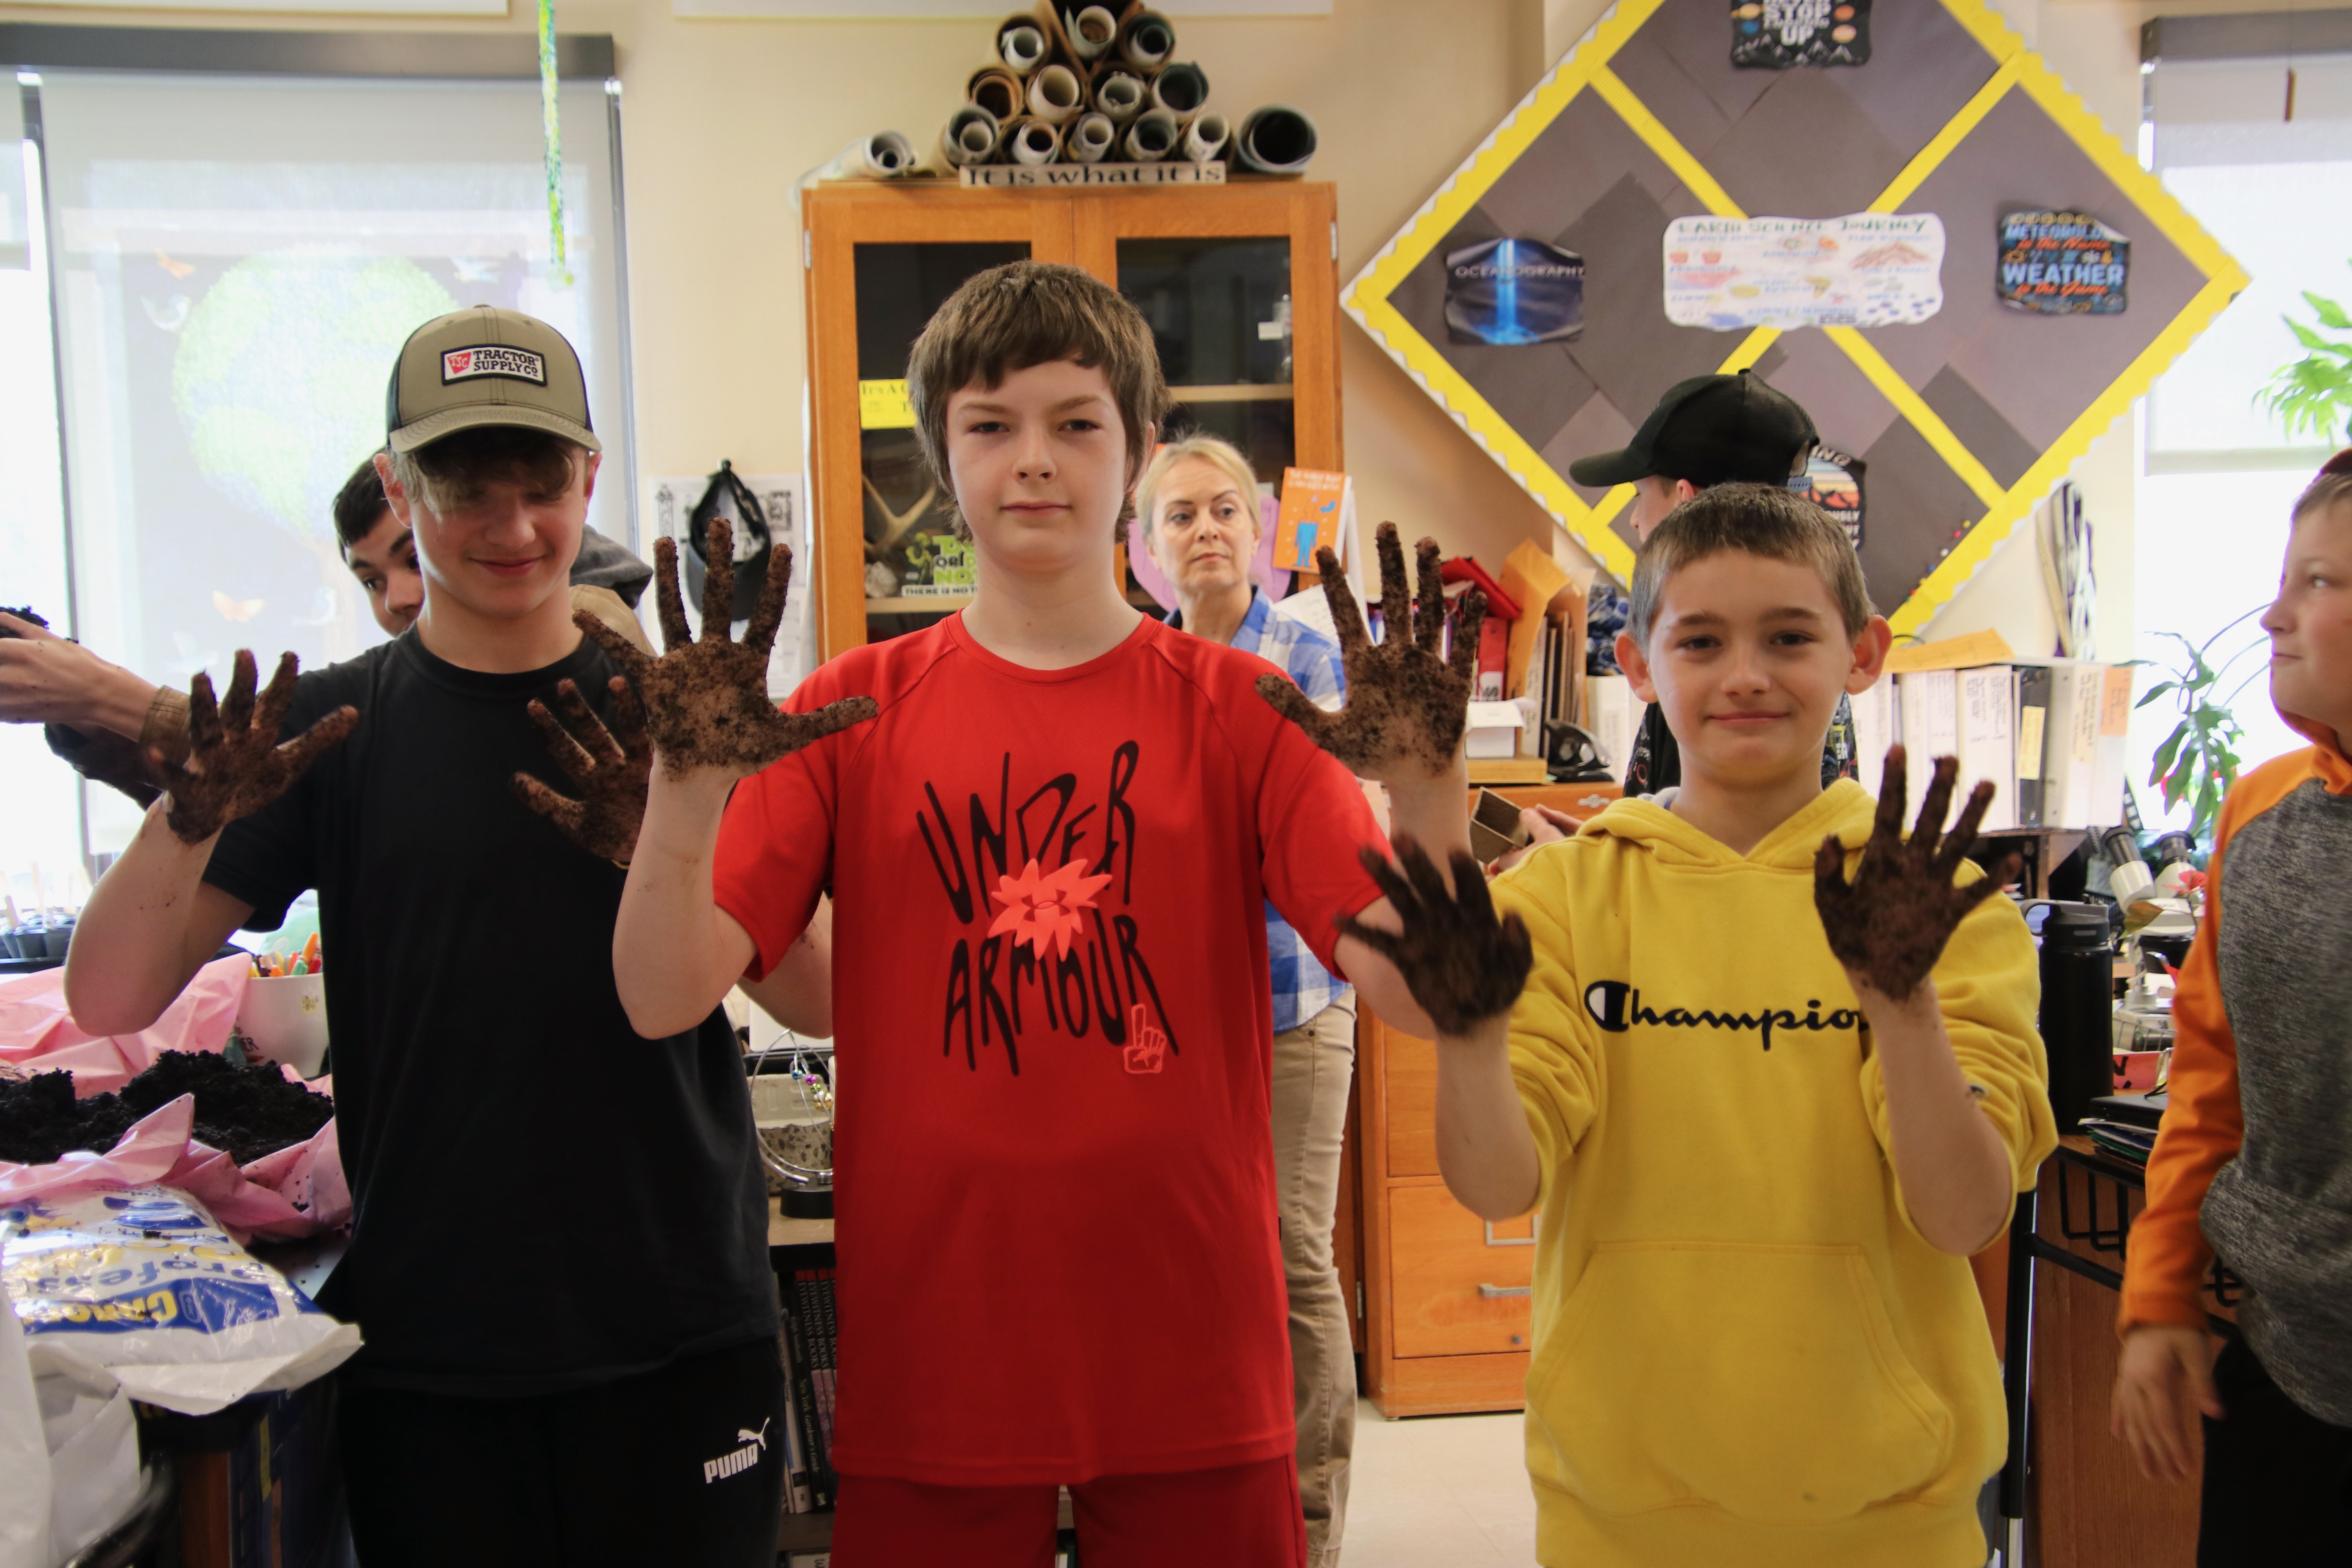 Three high school boys who have planting seedlings in a Living Environment class hold up their muddy hands